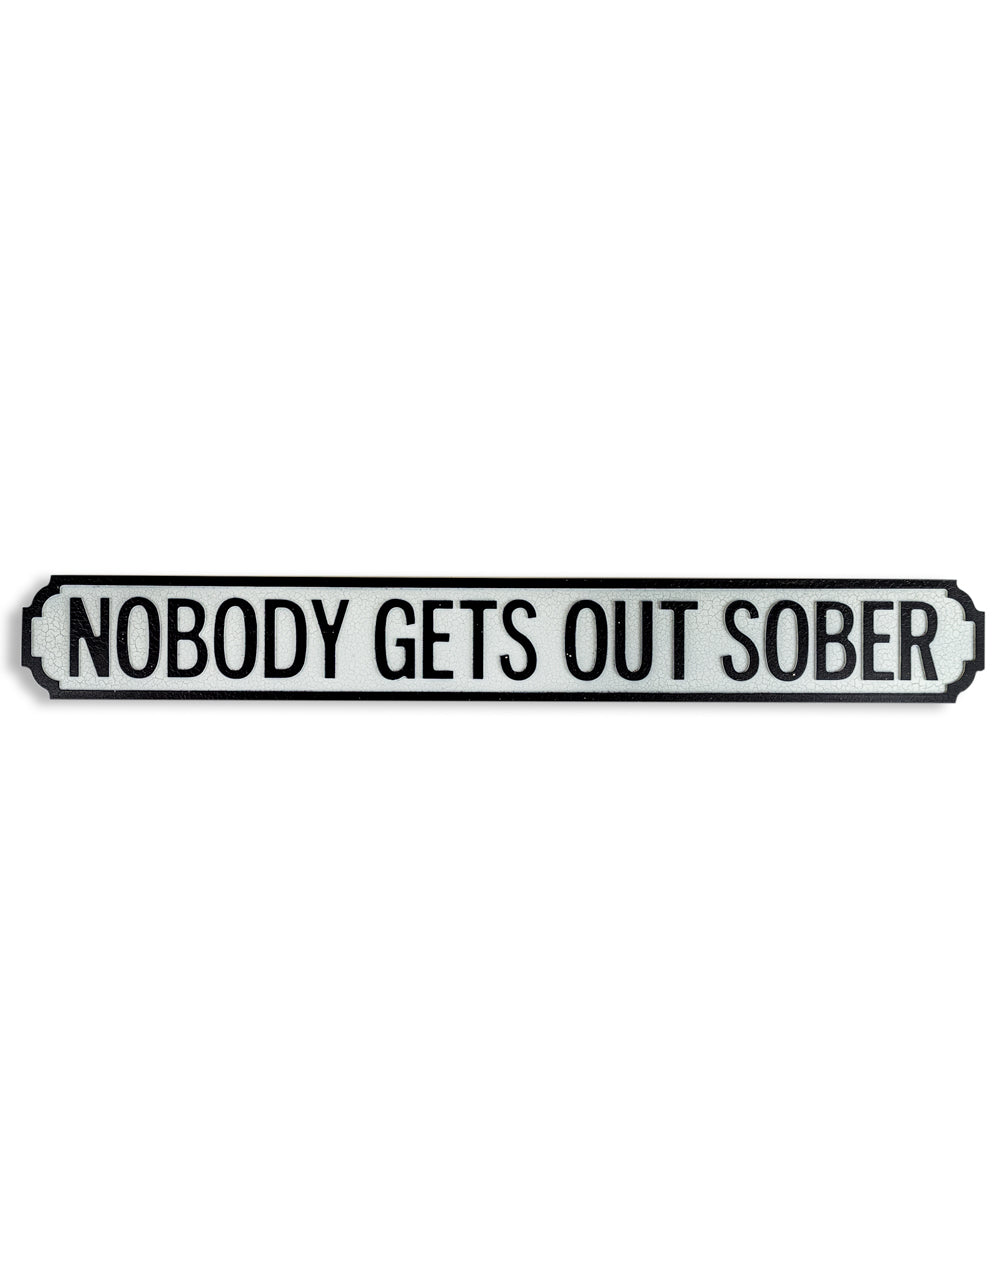 "Nobody Gets Out Sober" Sign